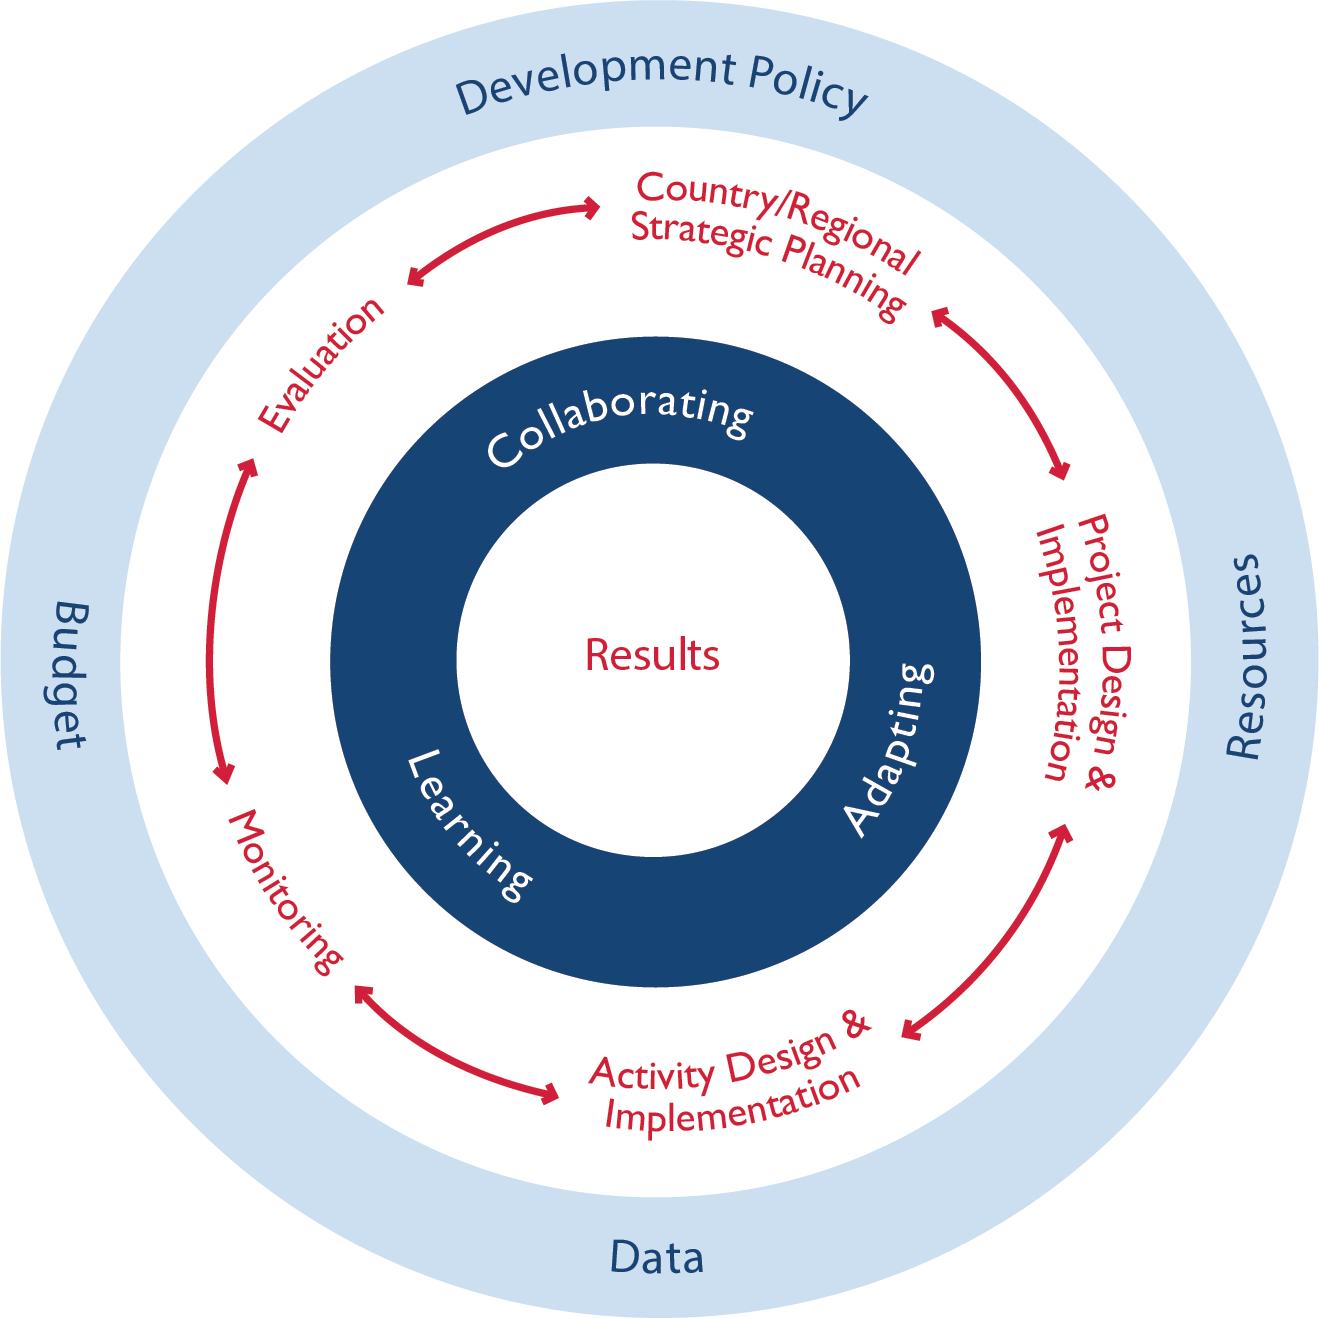 The Program Cycle is USAID’s operational model for planning, implementing, assessing, and adapting development programming.